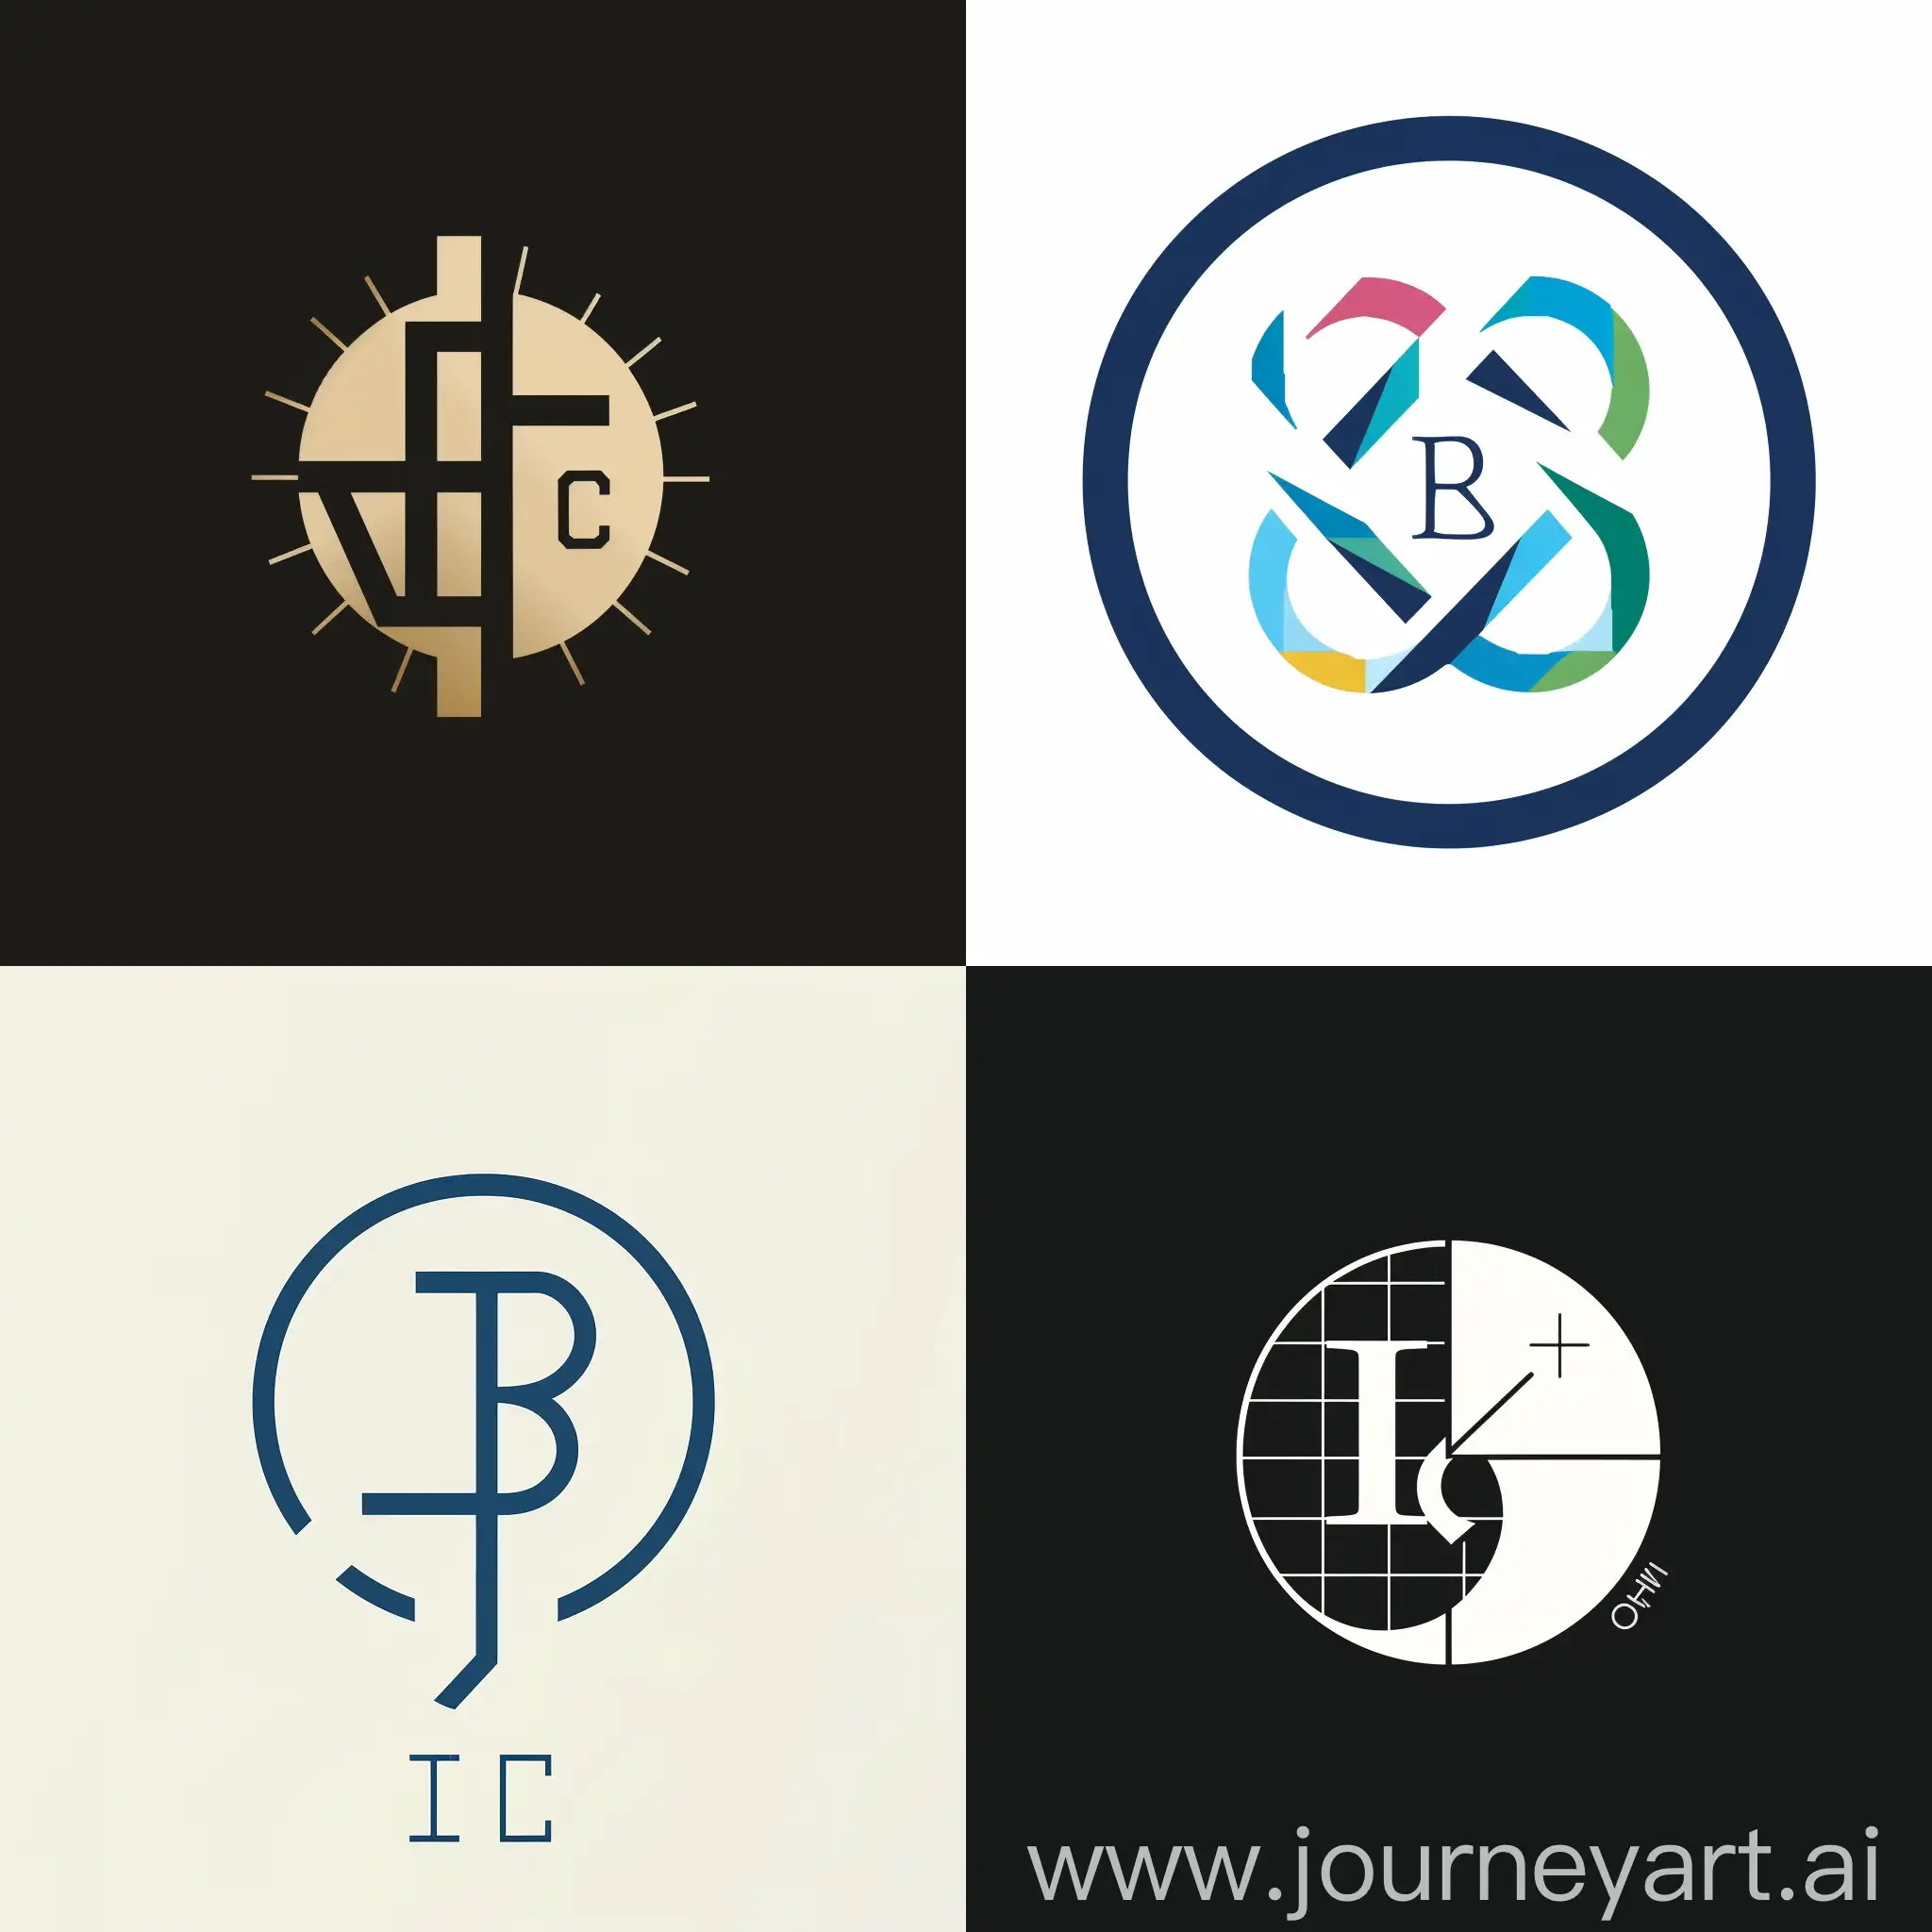 Create a logo using IB reference but add something related to Math